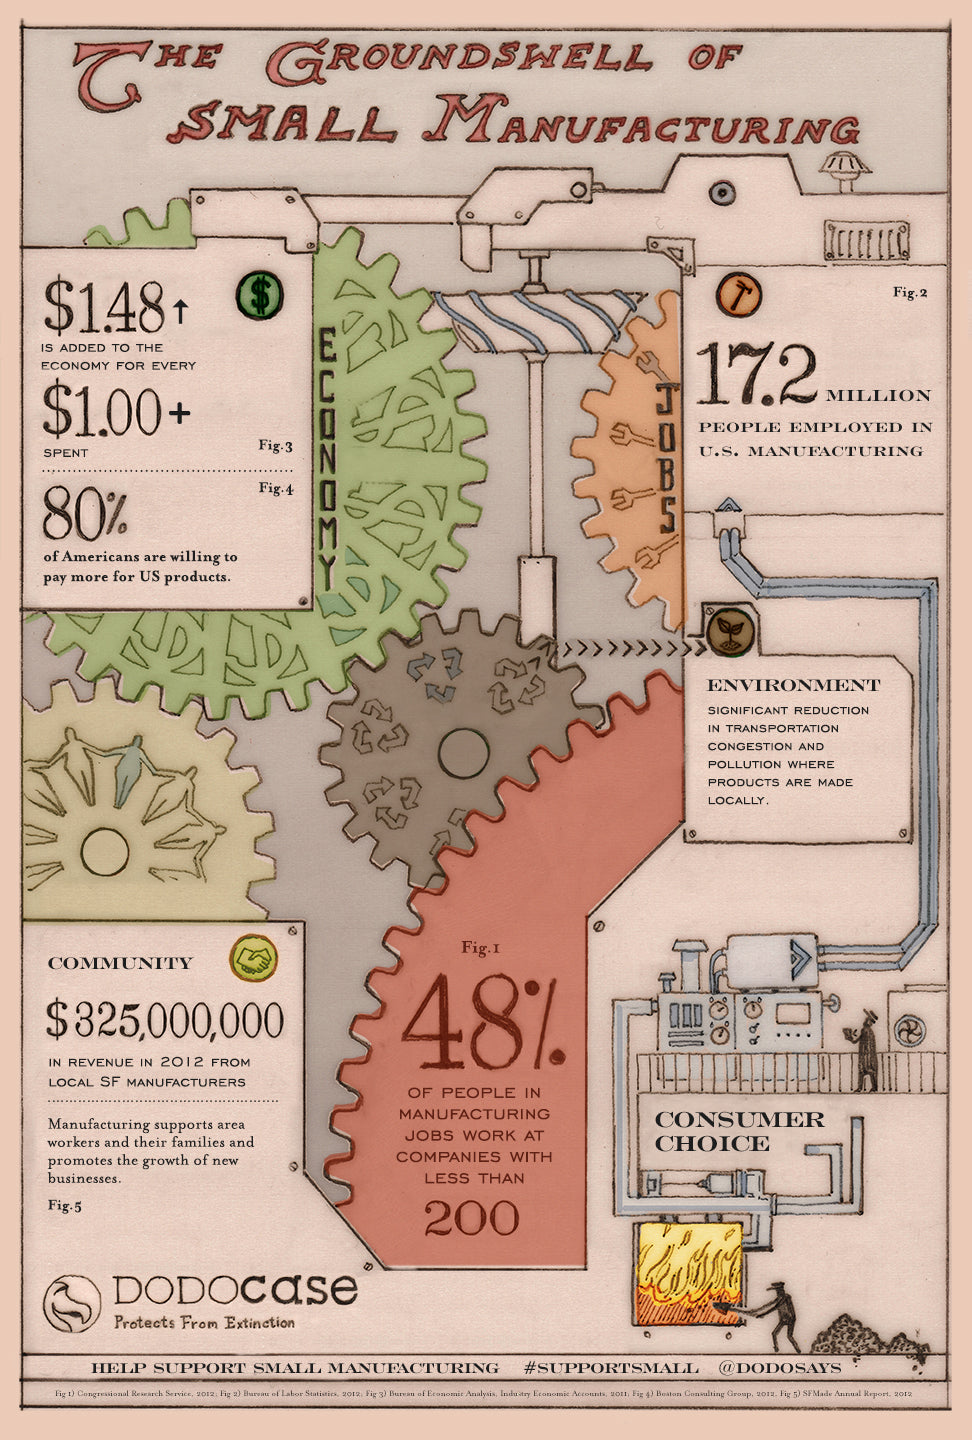 Support Small Manufacturing - Infographic